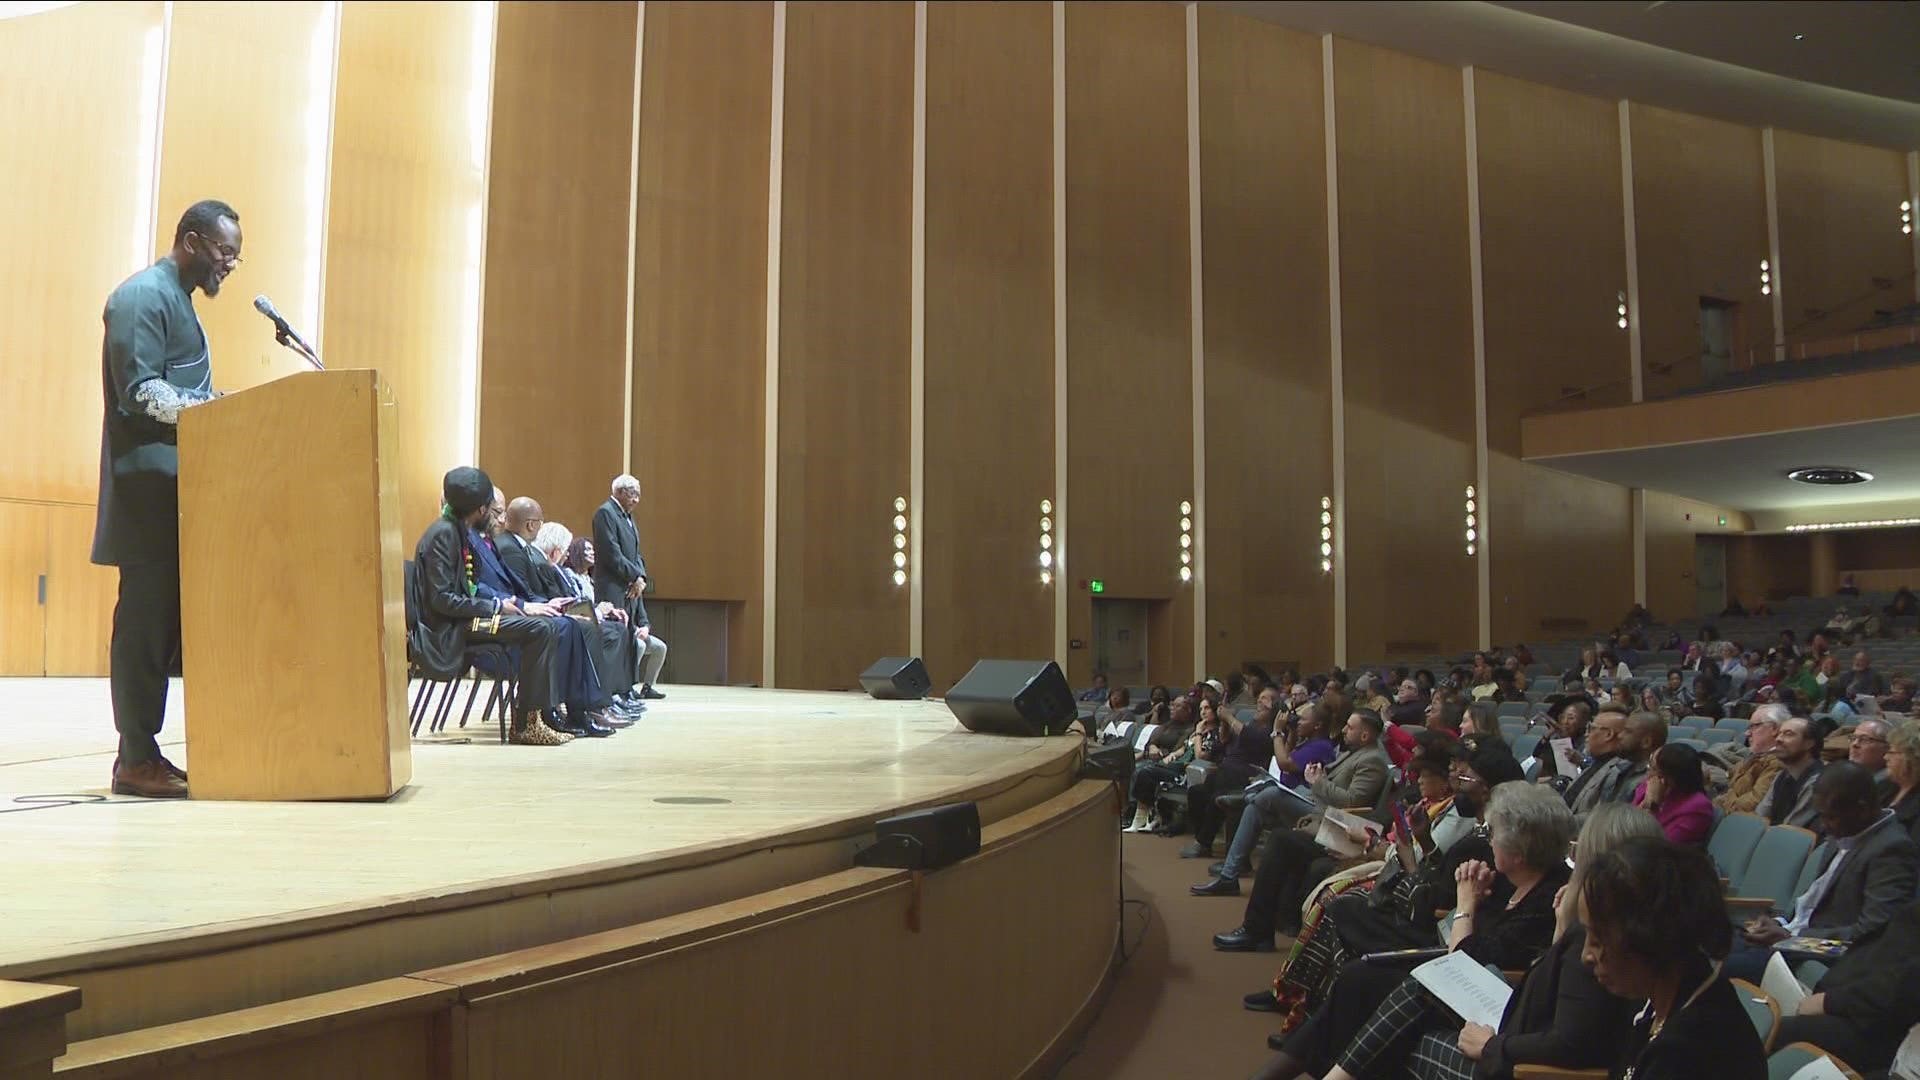 'The Concerned Citizens Following the Dream Committee' hosted the event at Kleinhans Music Hall remembering King's legacy and honoring his work for the civil rights